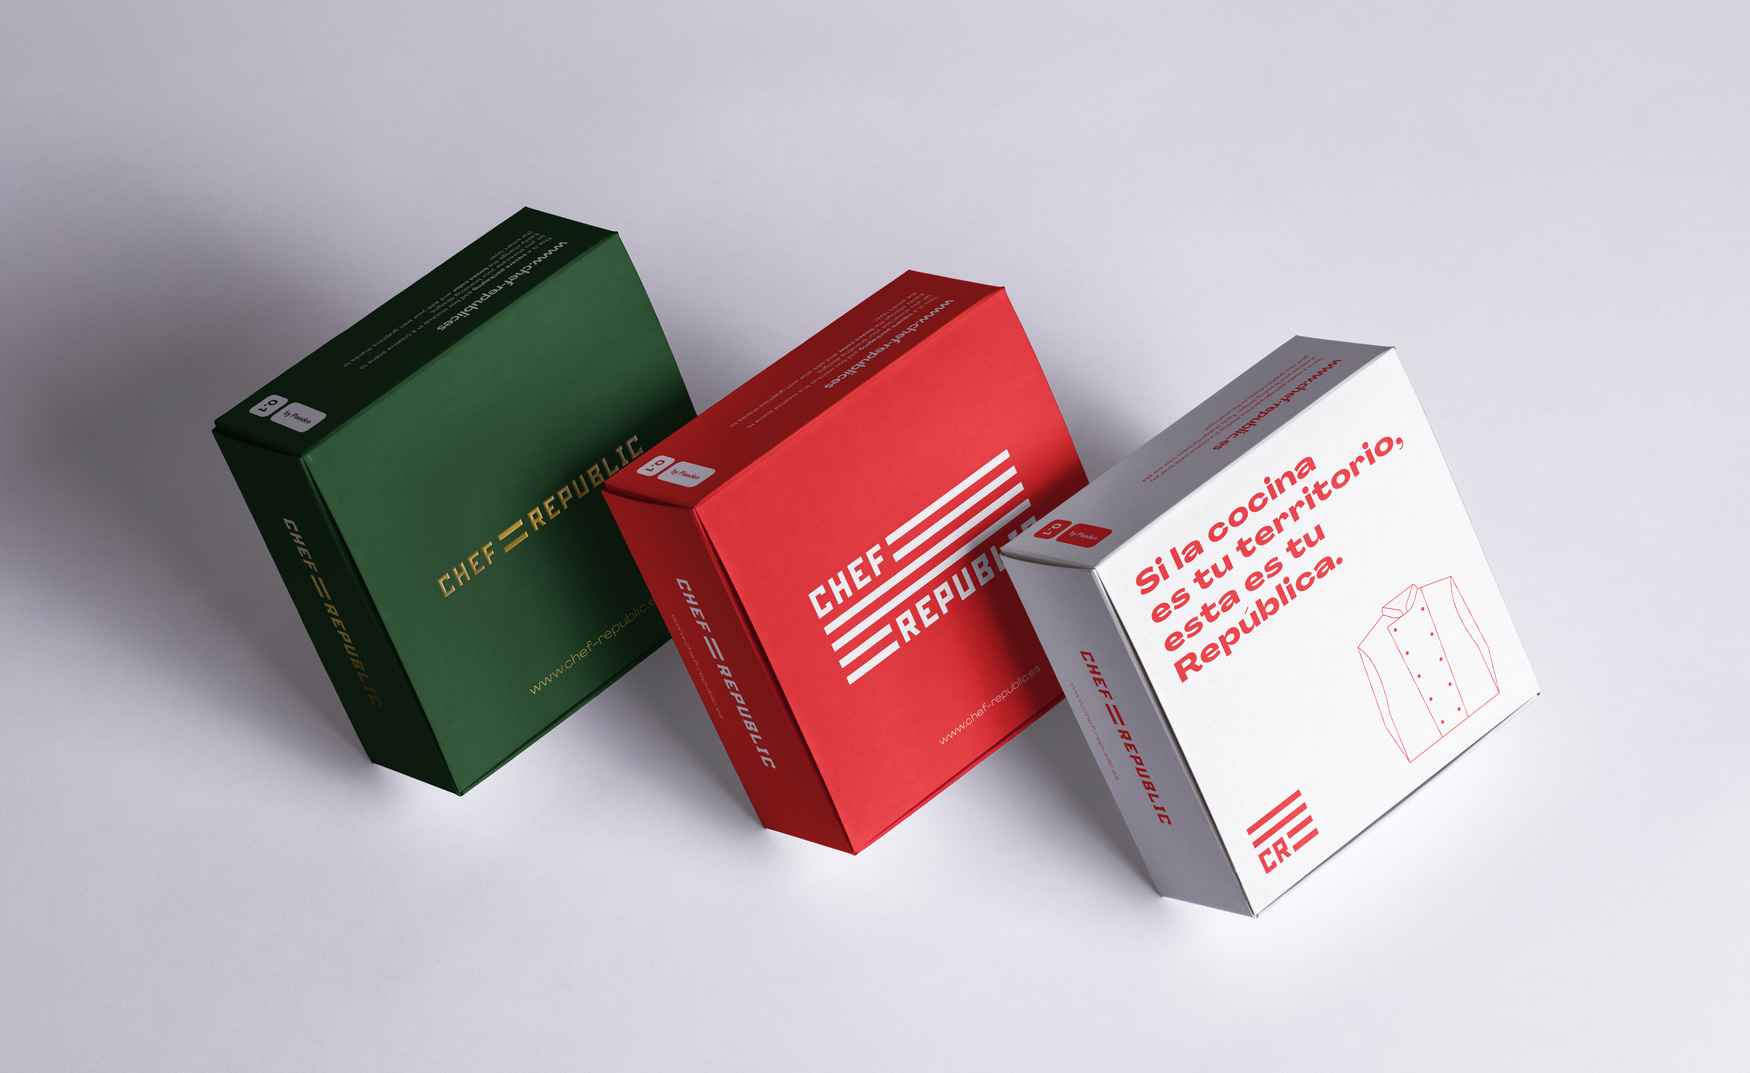 chef-republic-packaging-cajas